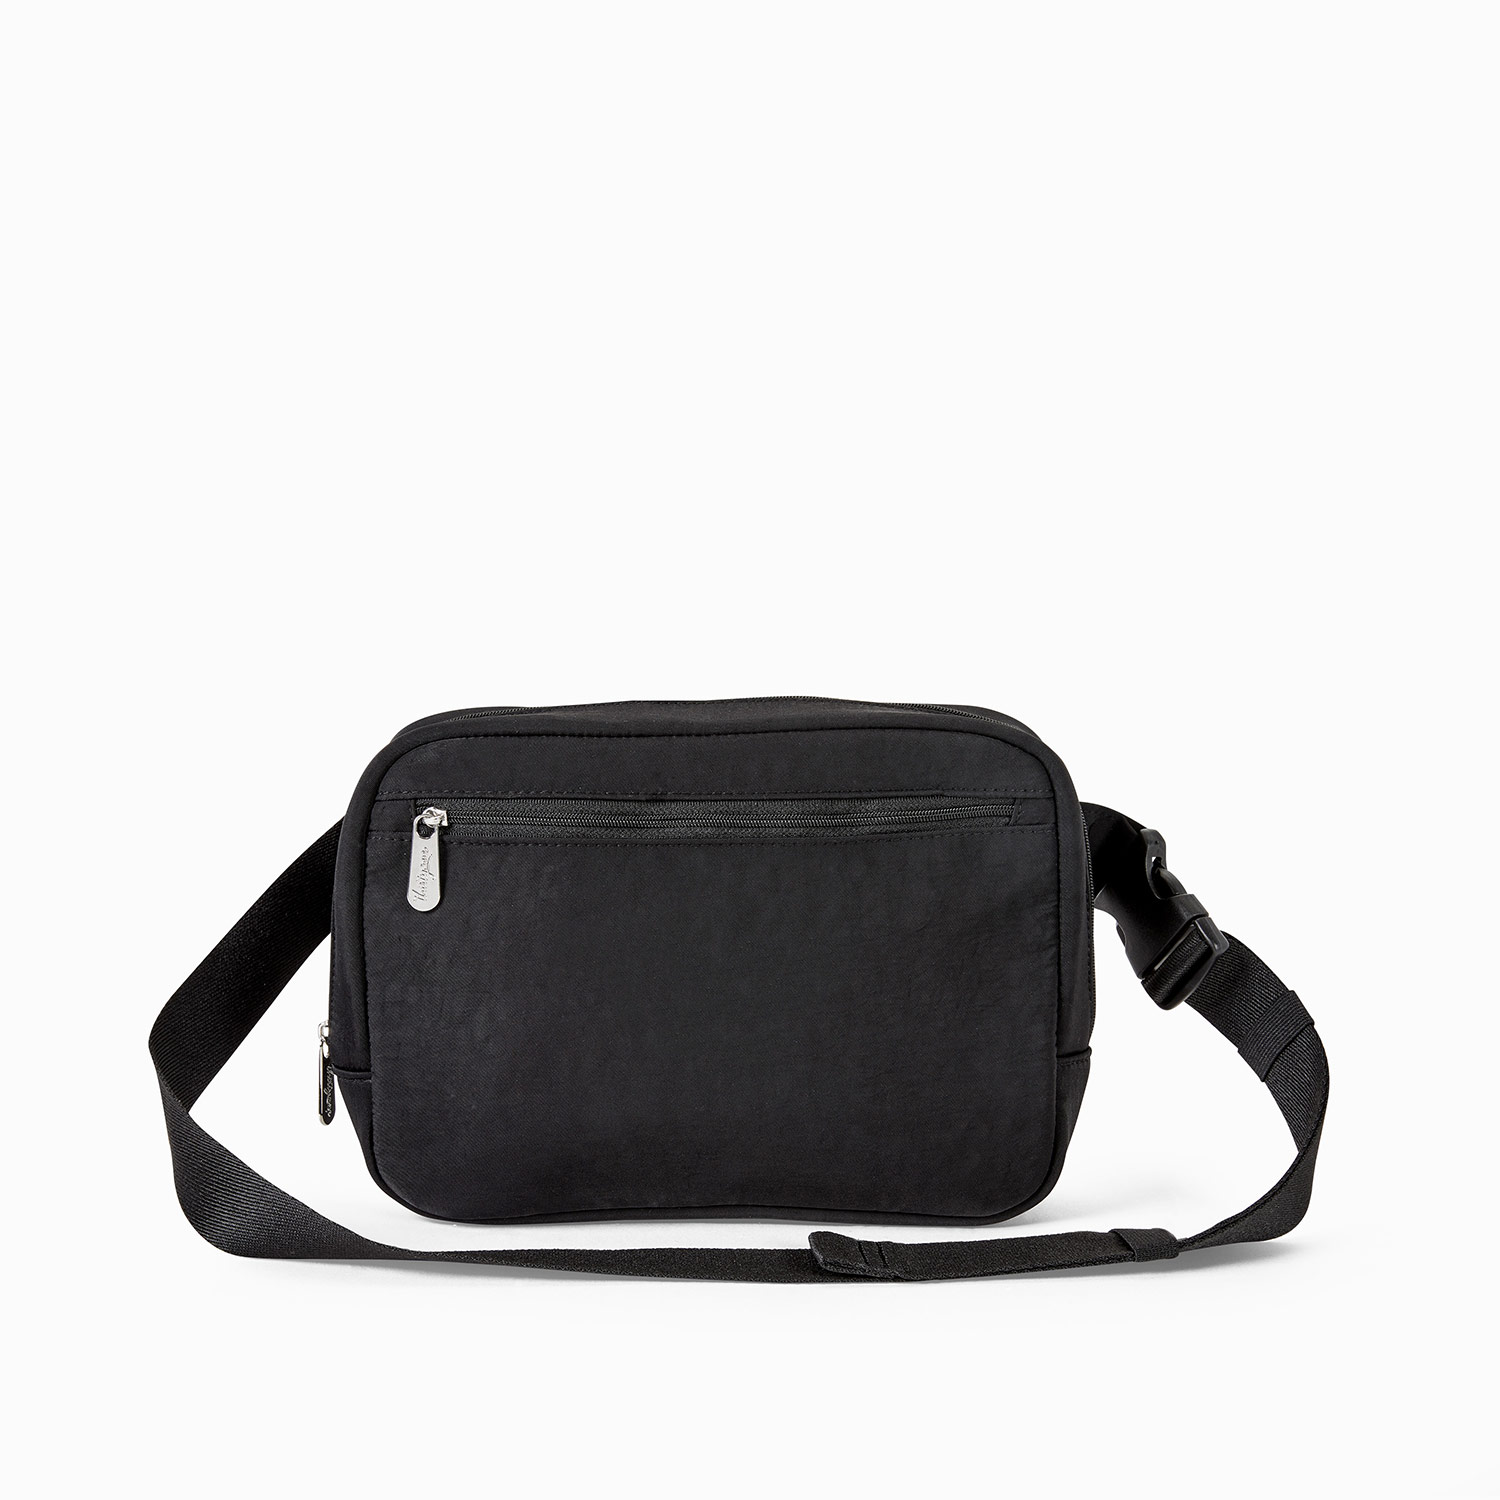 Top more than 95 sling bag latest